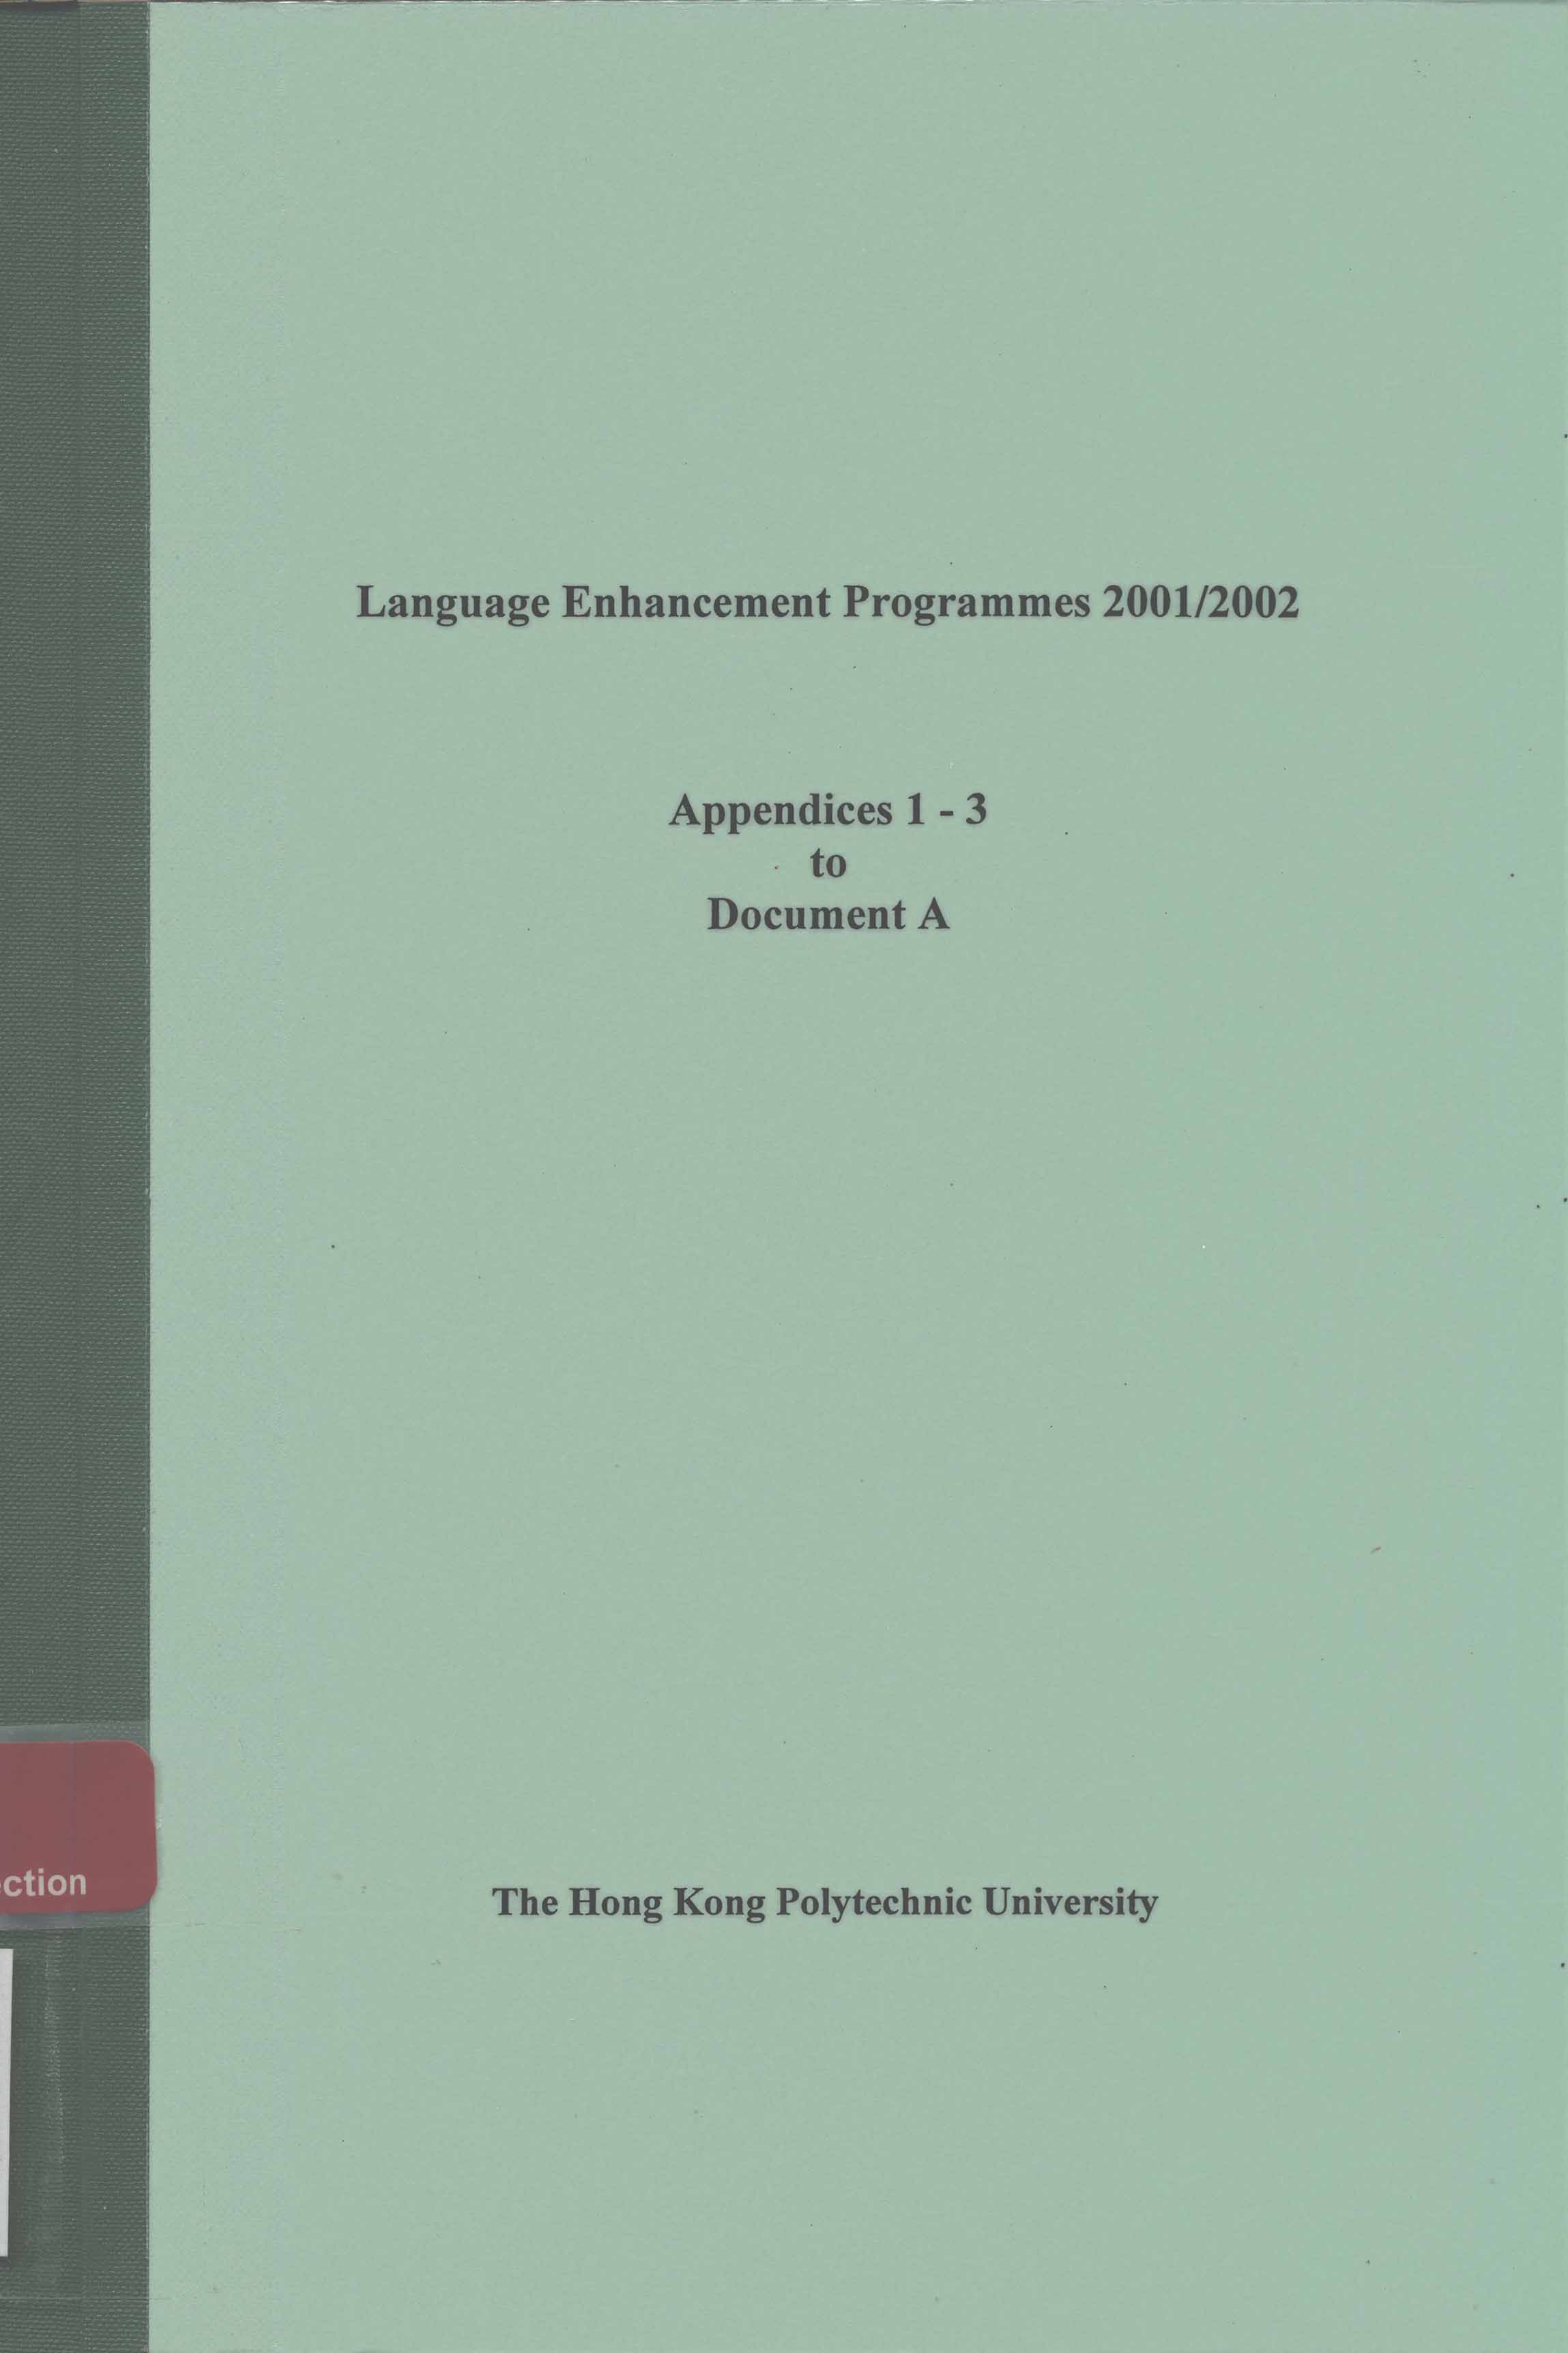 Annual report on language enhancement programmes 2001/2002 - Appendices 1 - 3 to Document A